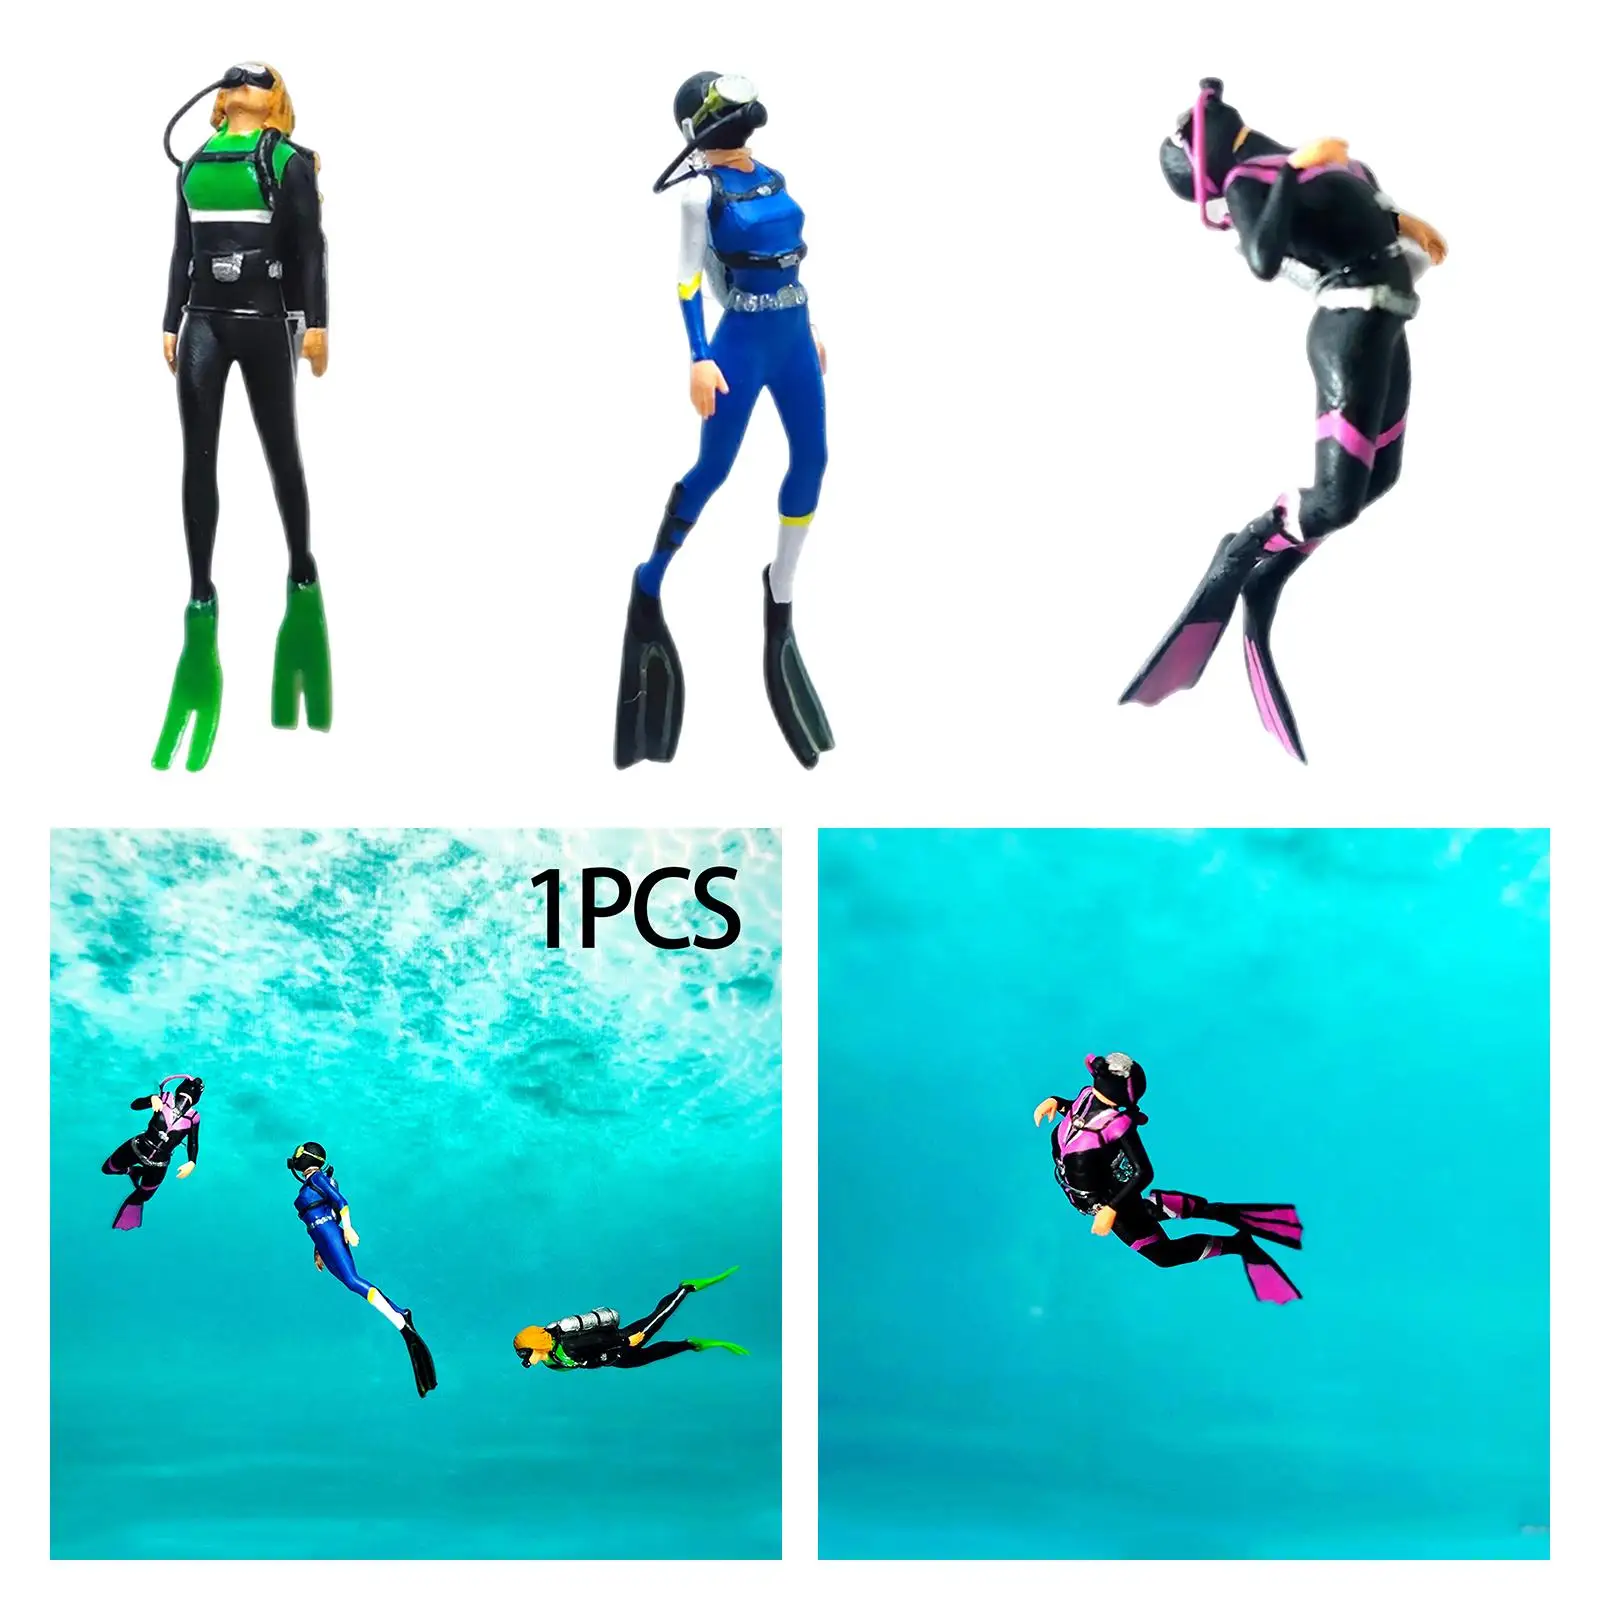 1/64 Action Figurines Model Trains People Figures Realistic Diving Character Model for Micro Landscapes Dollhouse Accessories